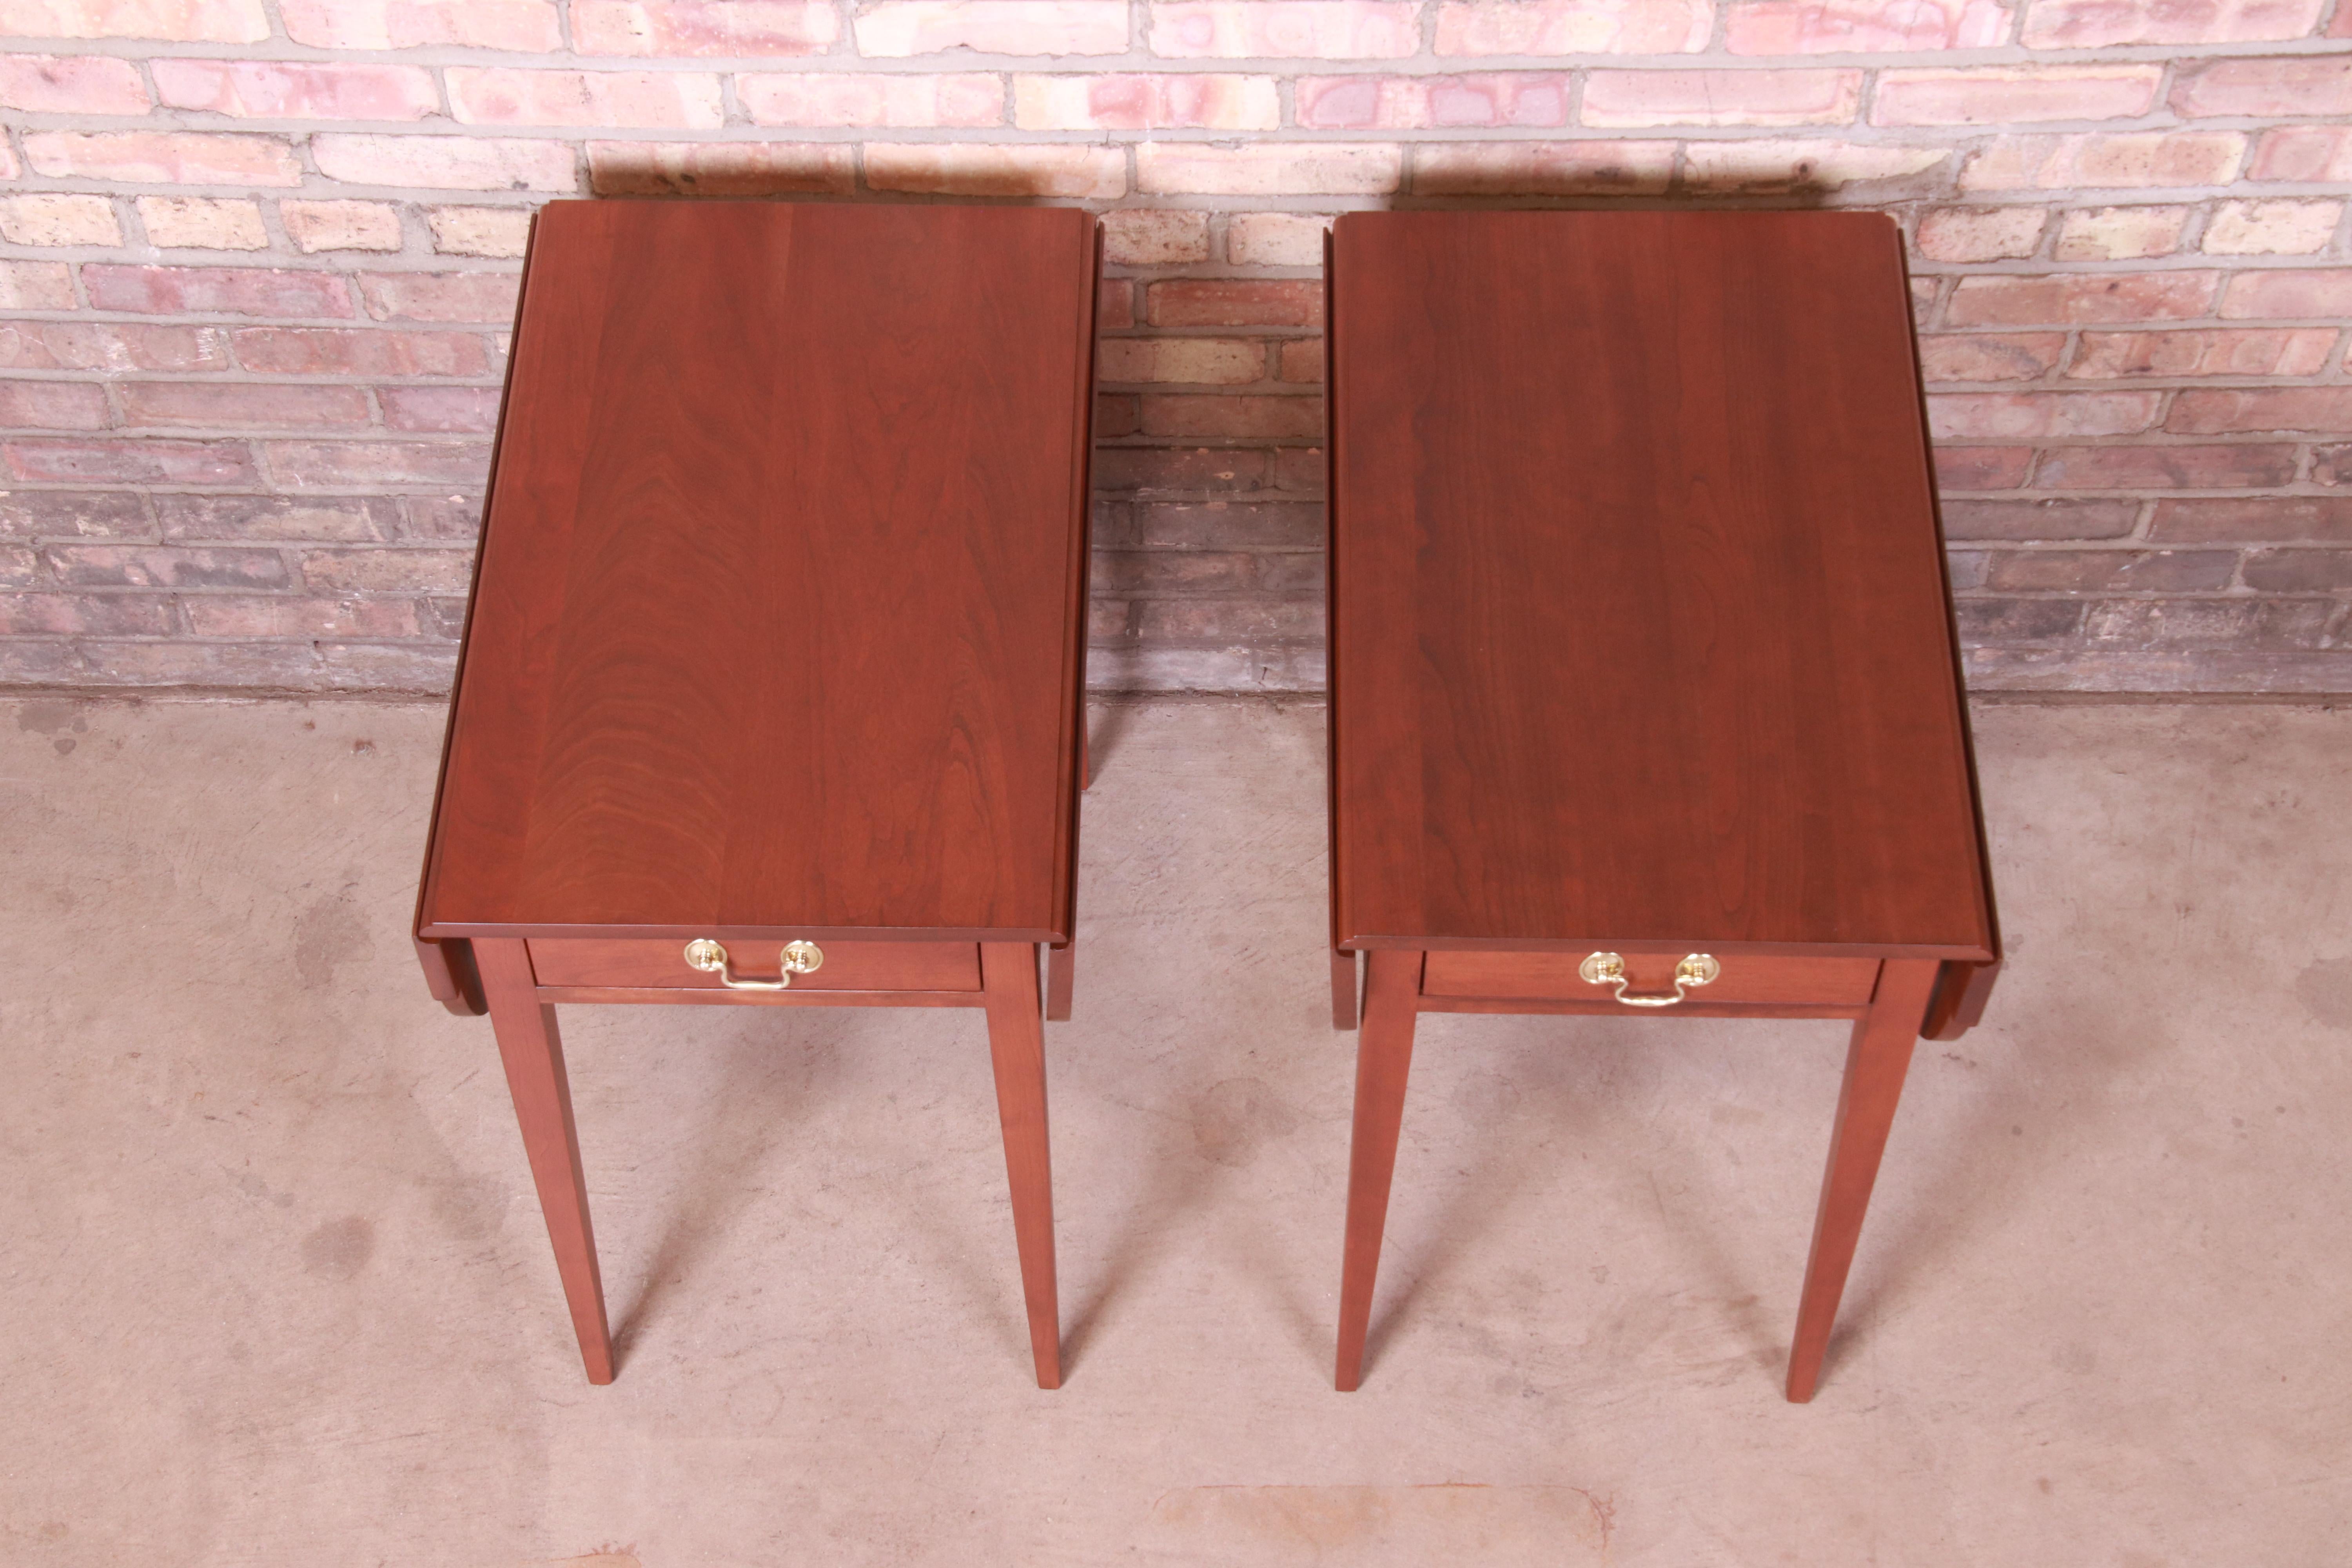 Stickley Federal Solid Cherry Wood Pembroke Tea Tables, Newly Refinished For Sale 1